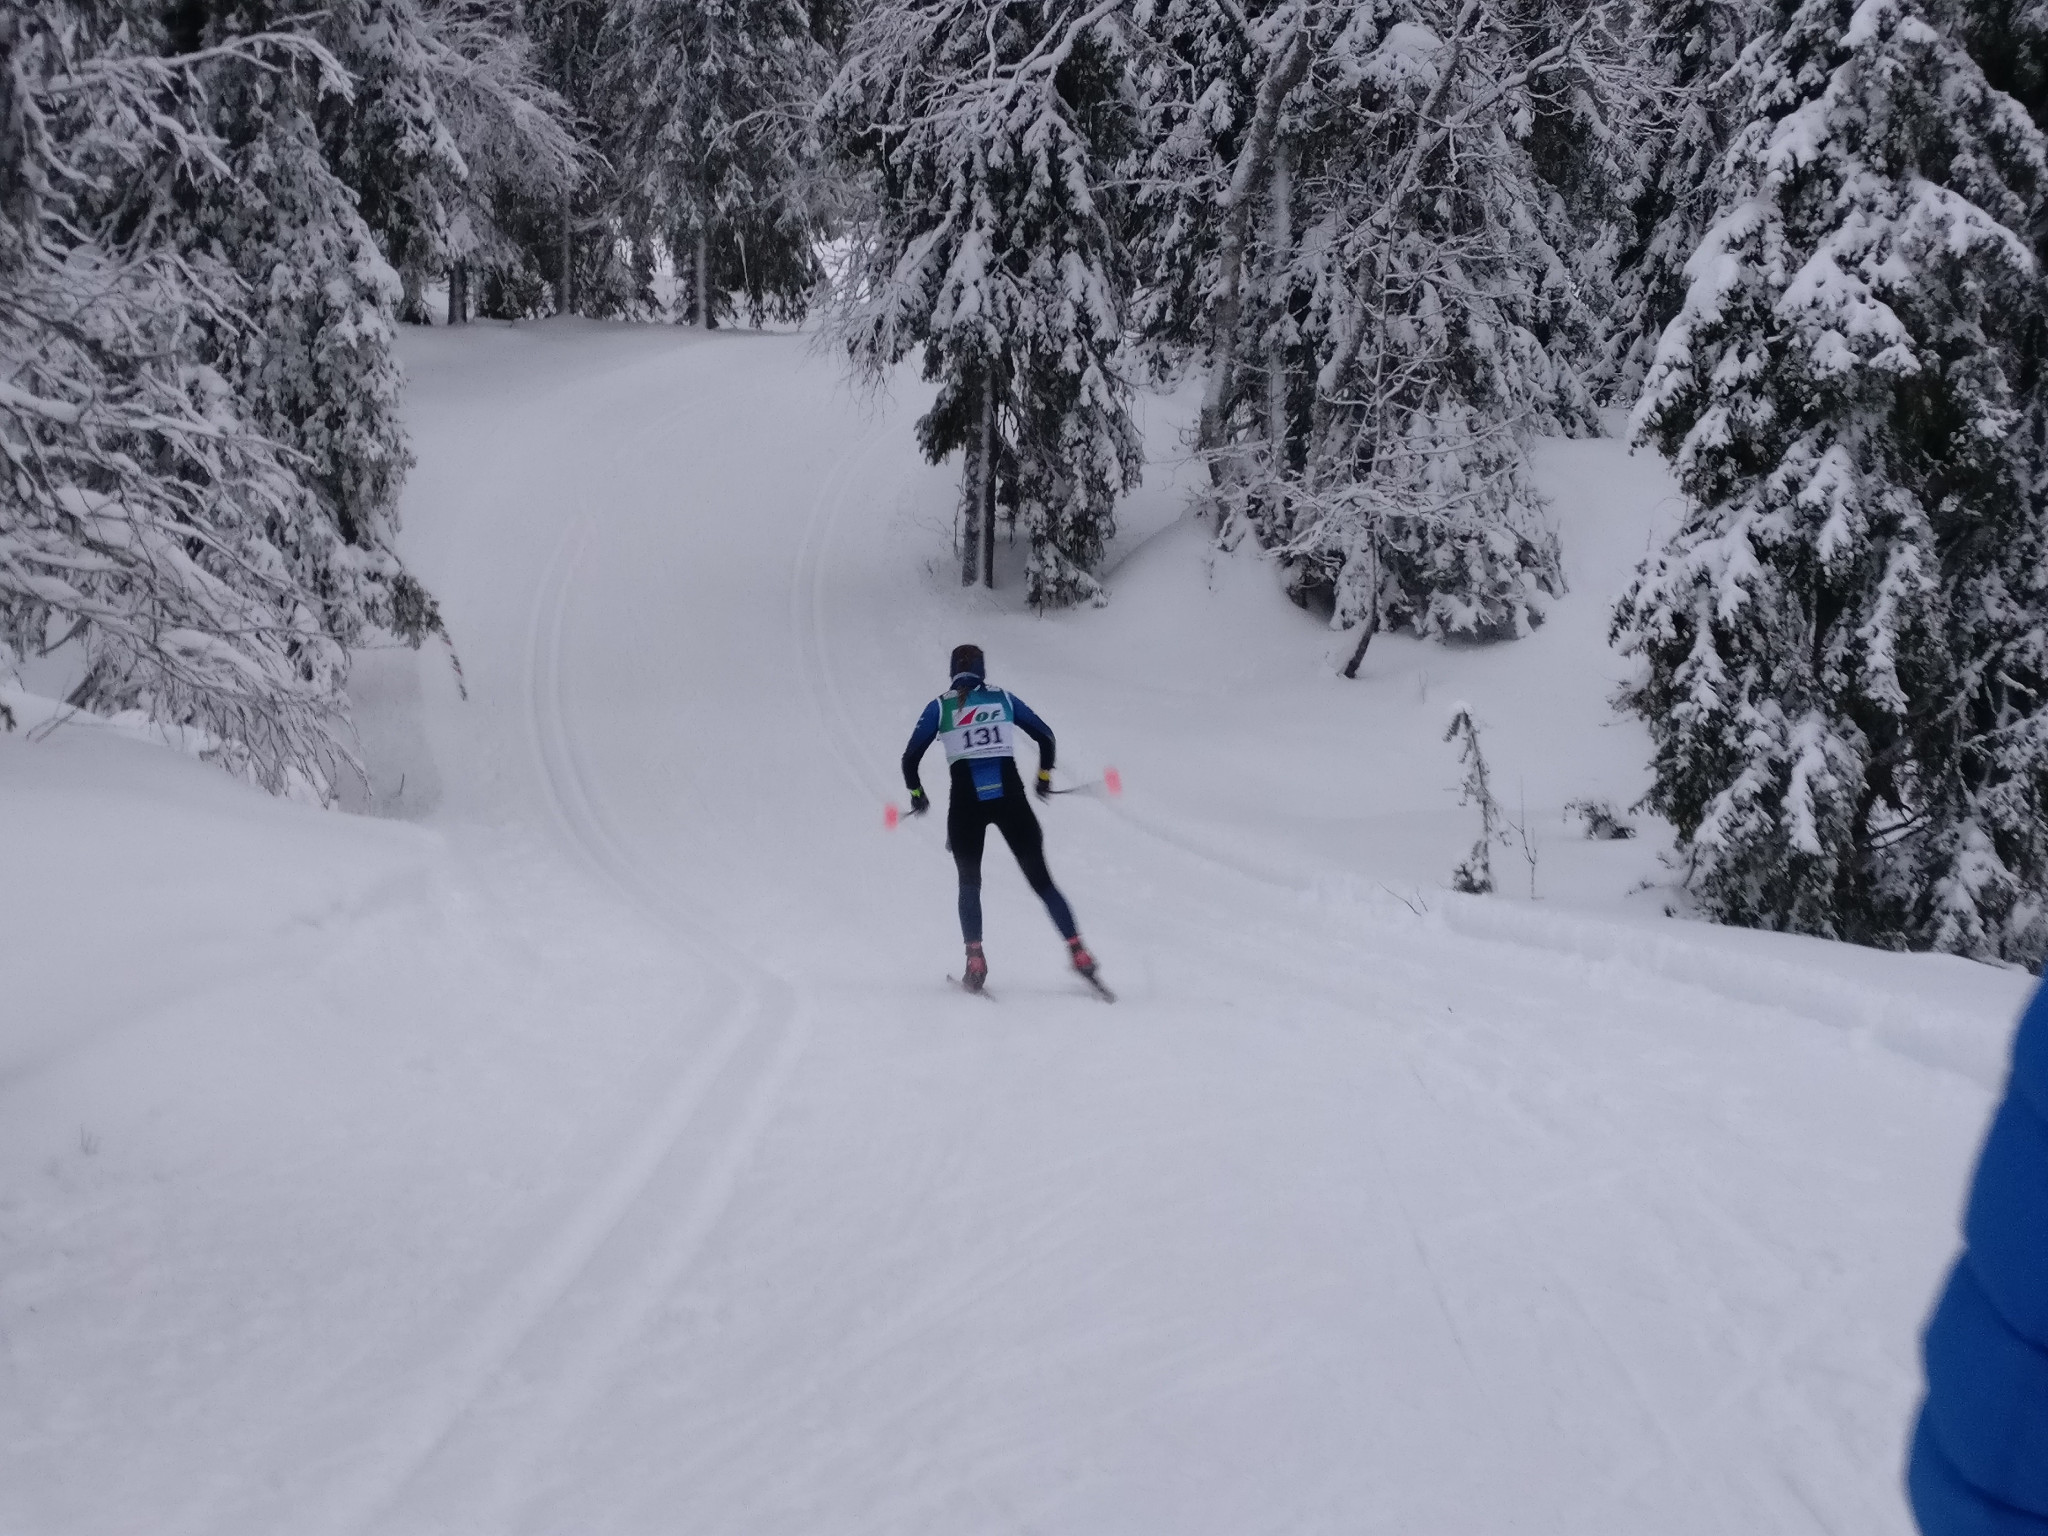 Russian completes clean sweep of men's events at Ski Orienteering World Cup